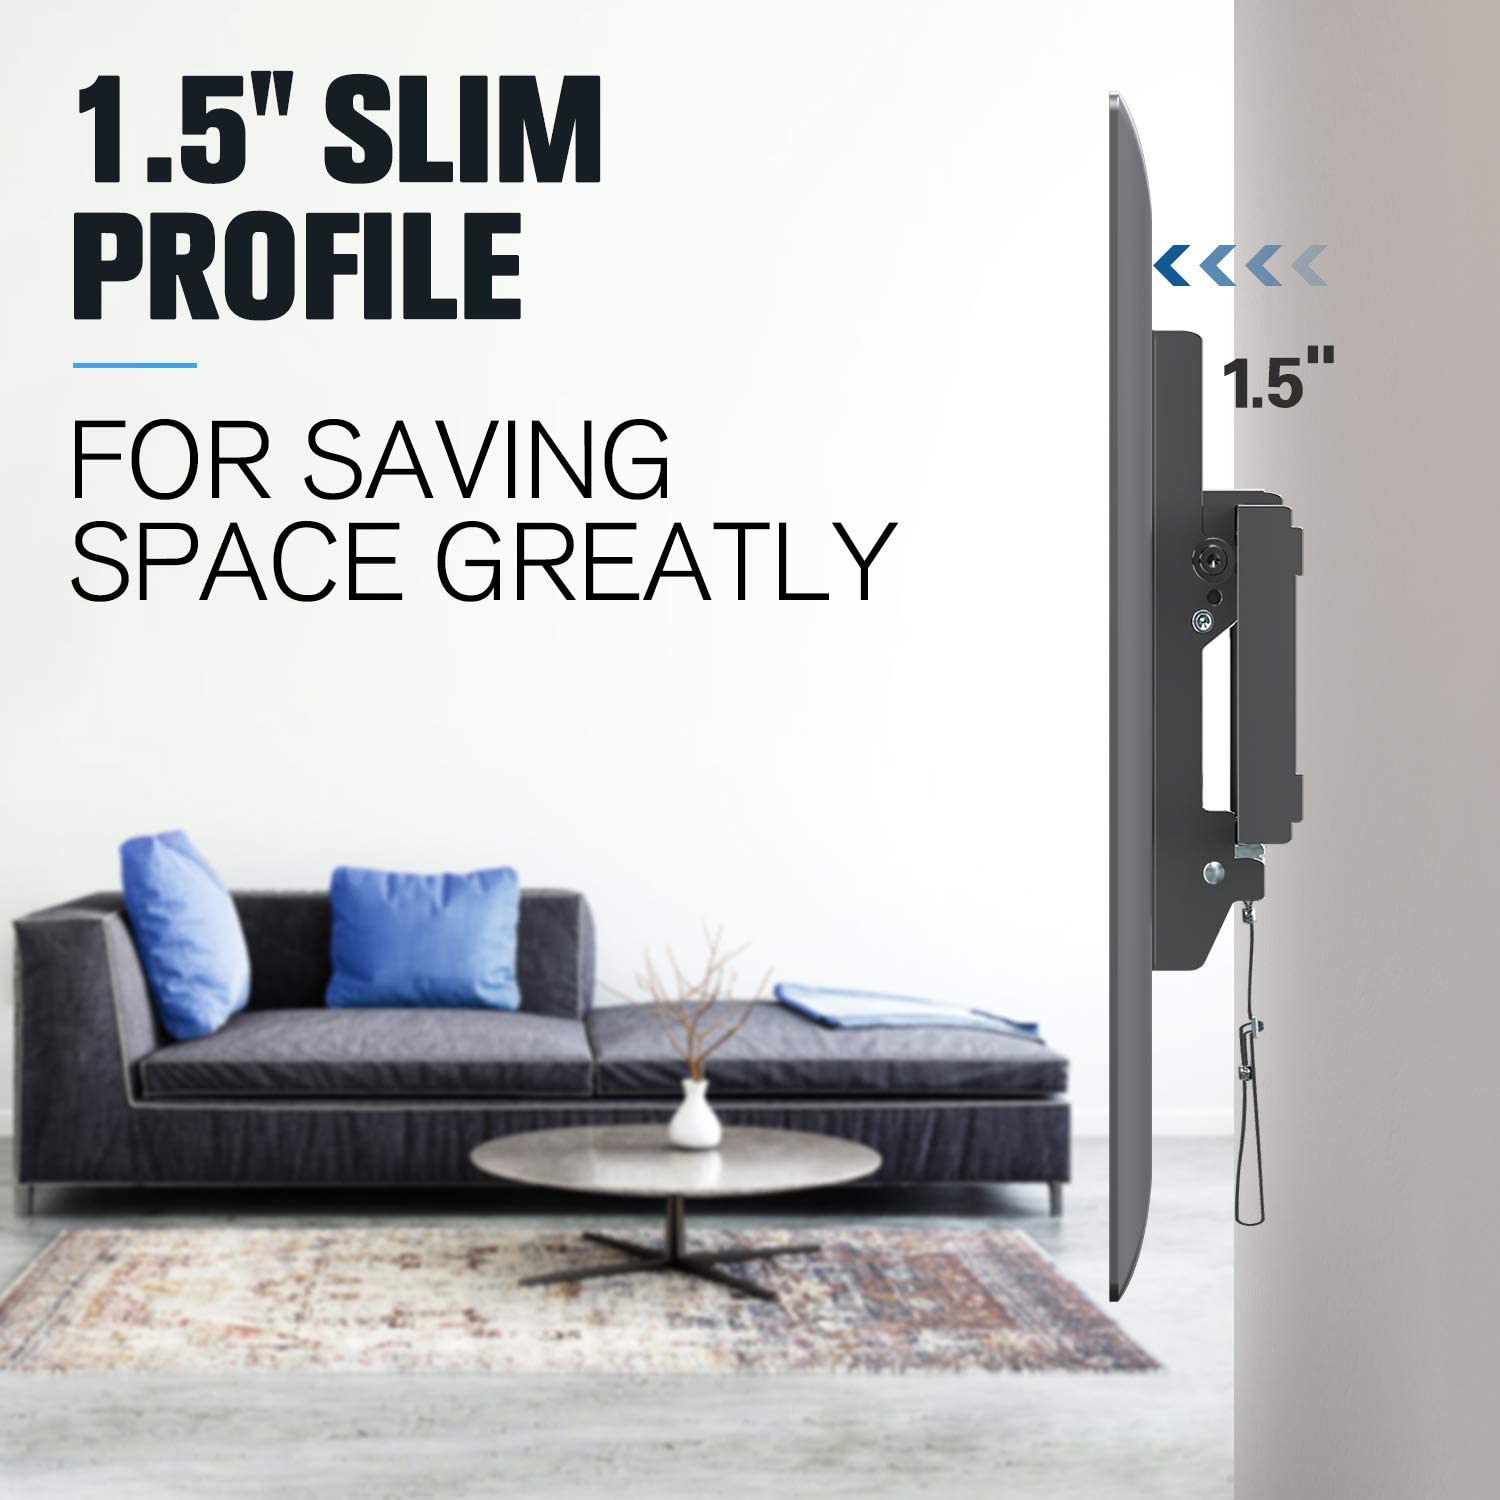 tilting TV wall mount with 1.5'' slim profile creates a sleek and clean look